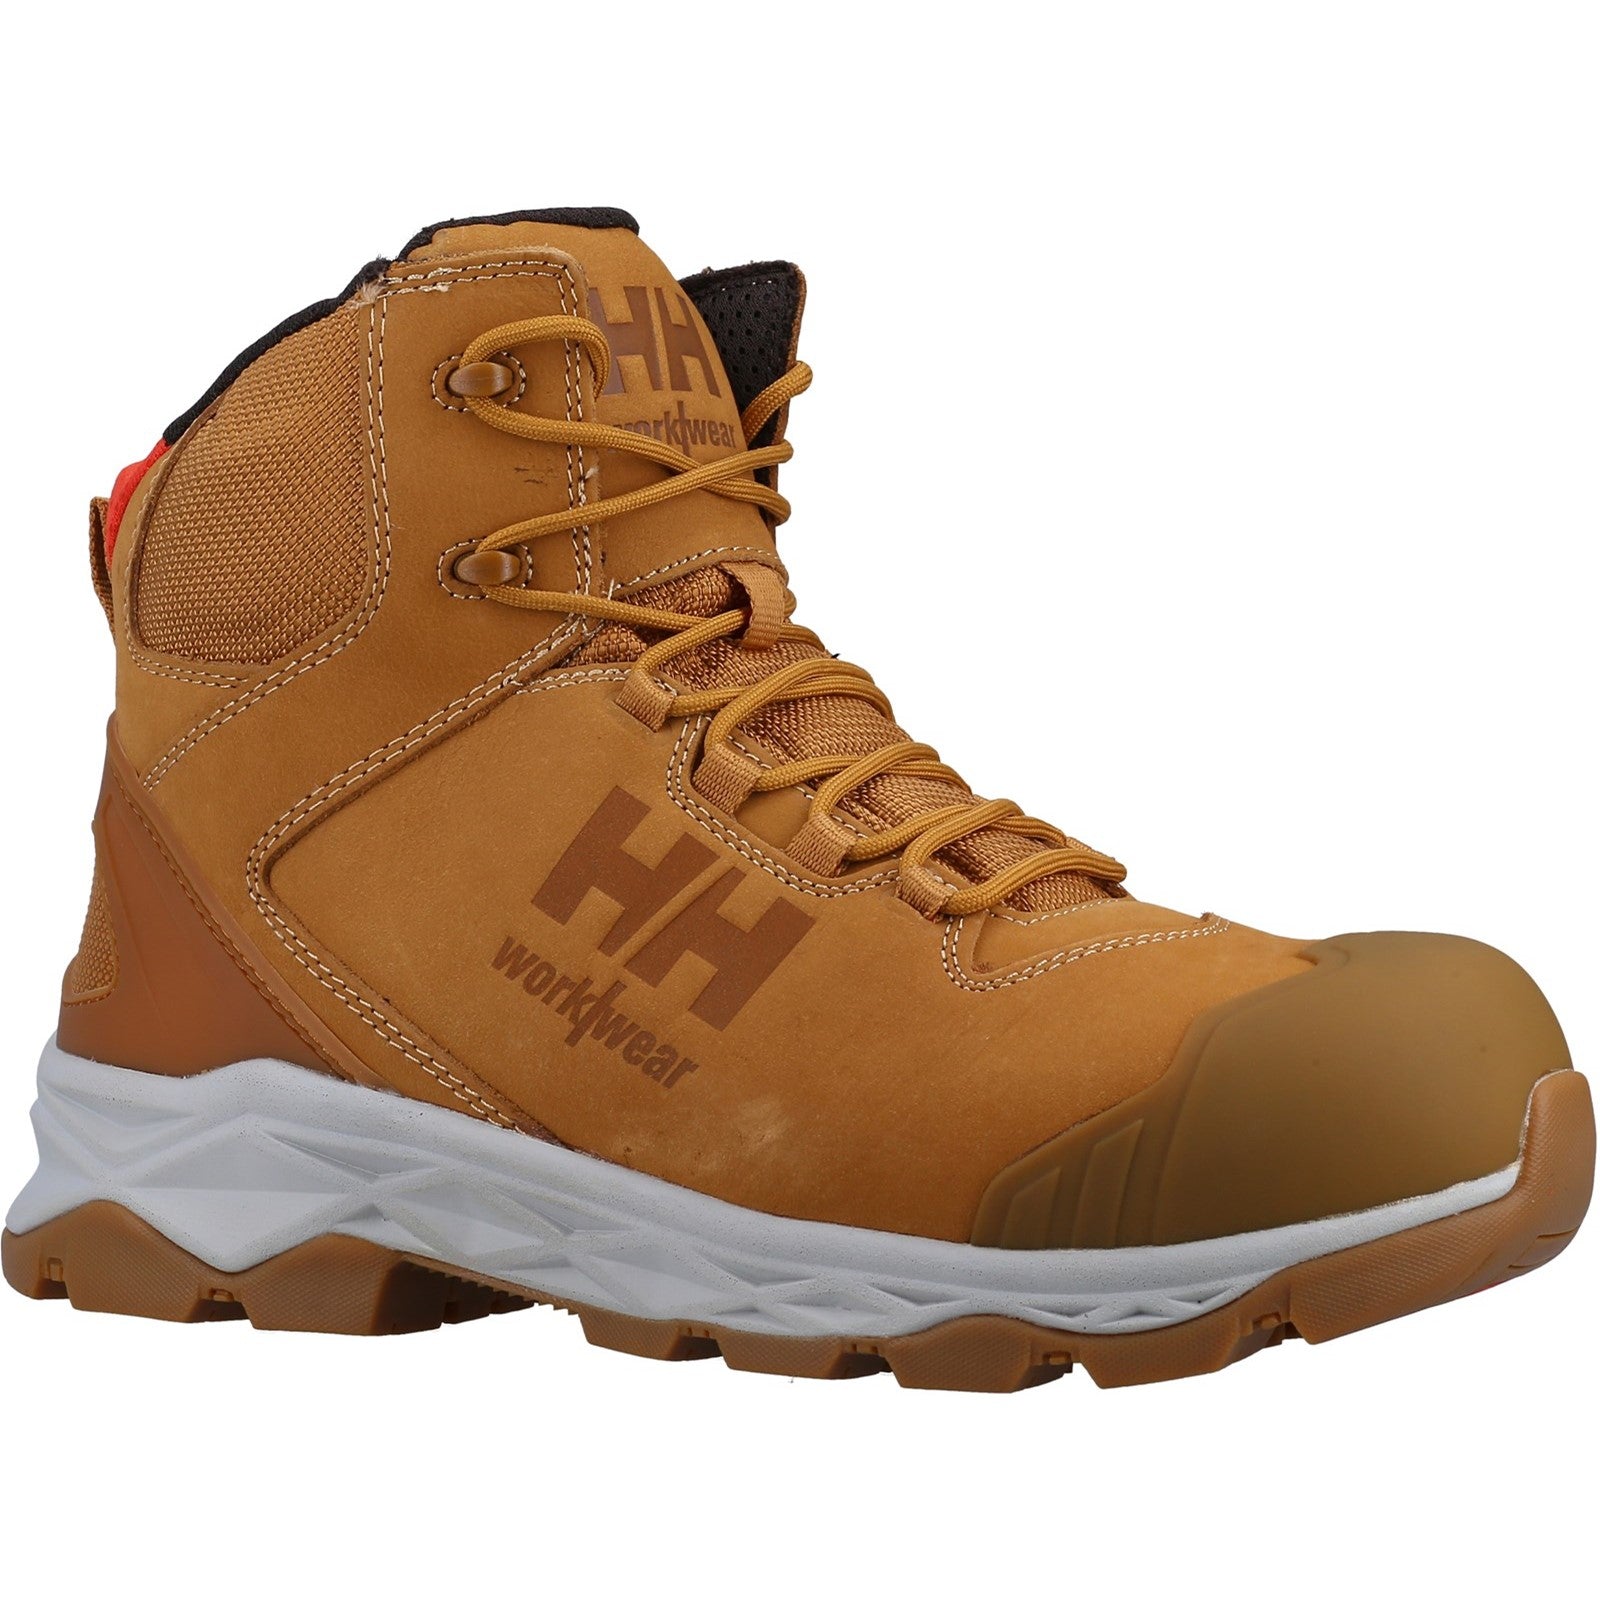 Oxford Mid S3 Safety Boot, Helly Hansen